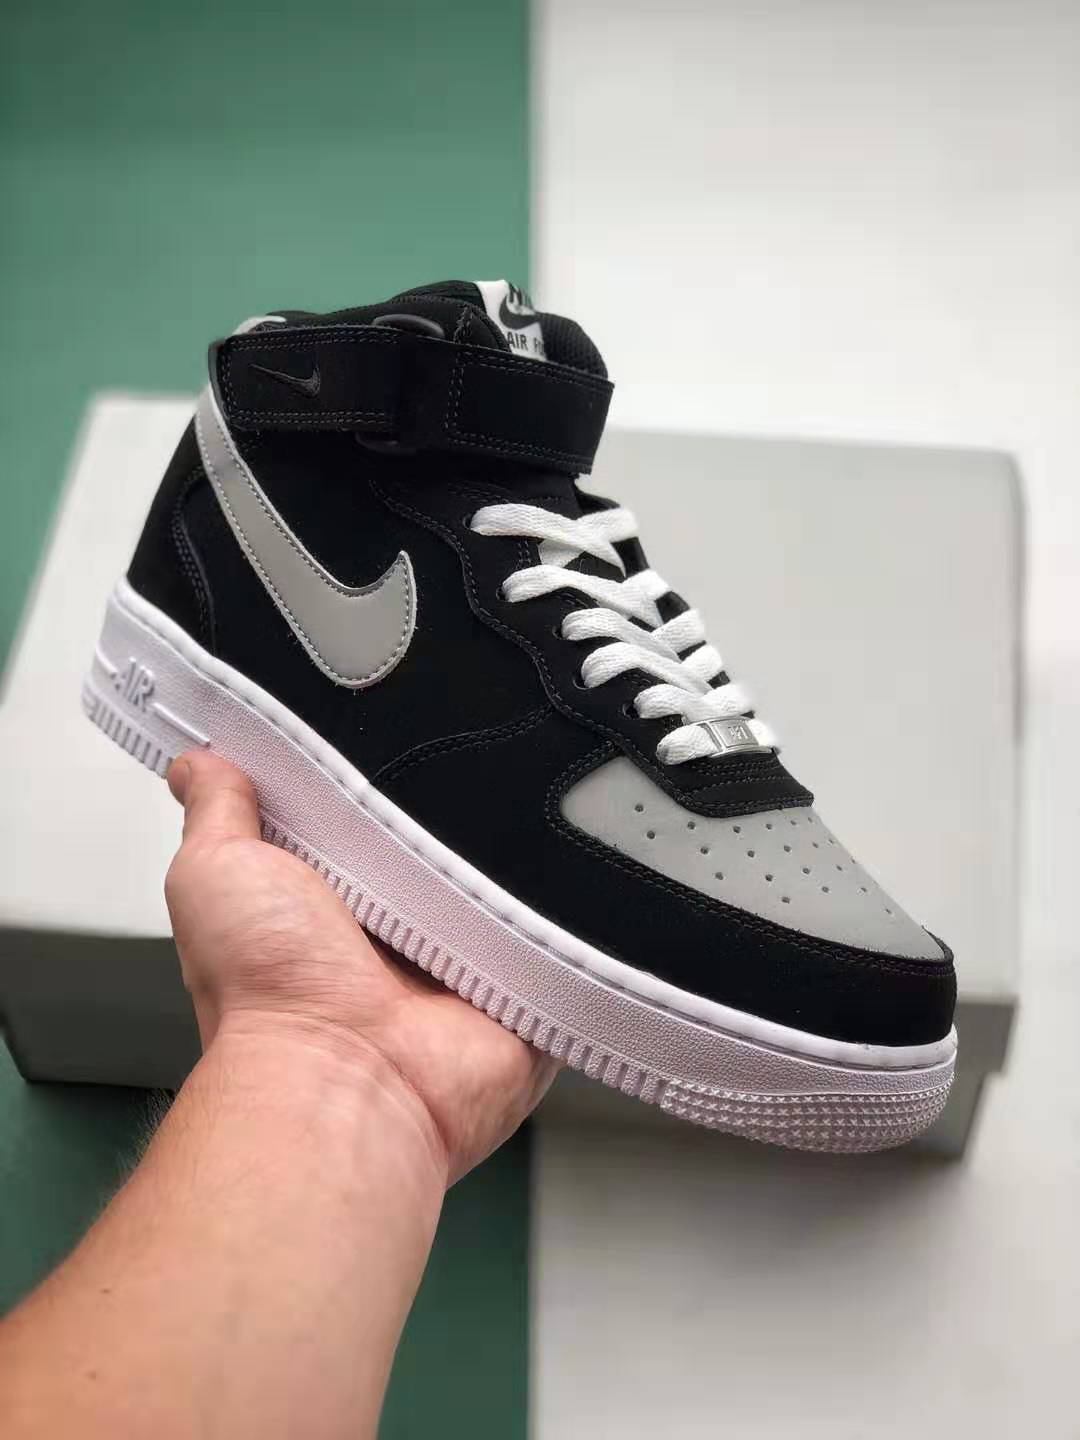 Nike Air Force 1 Mid 07 Black White 596728-305 - Classic Style & Iconic Design | Shop Now!